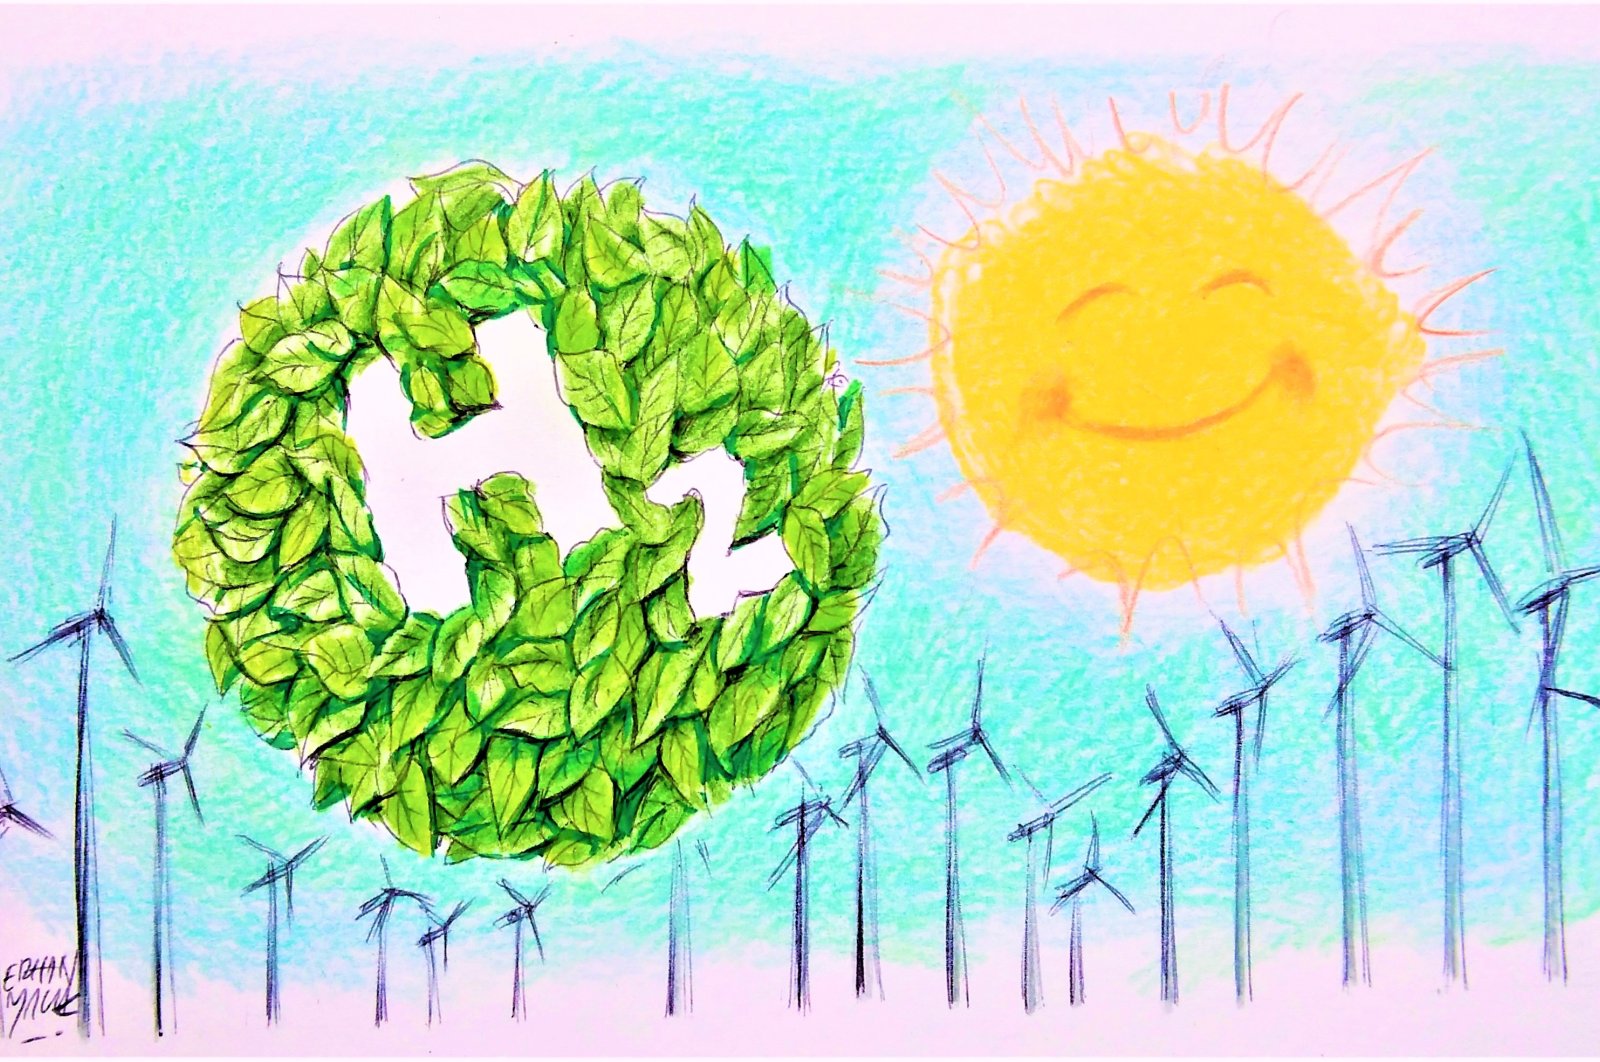 Hydrogen: The rising trend in energy transformation